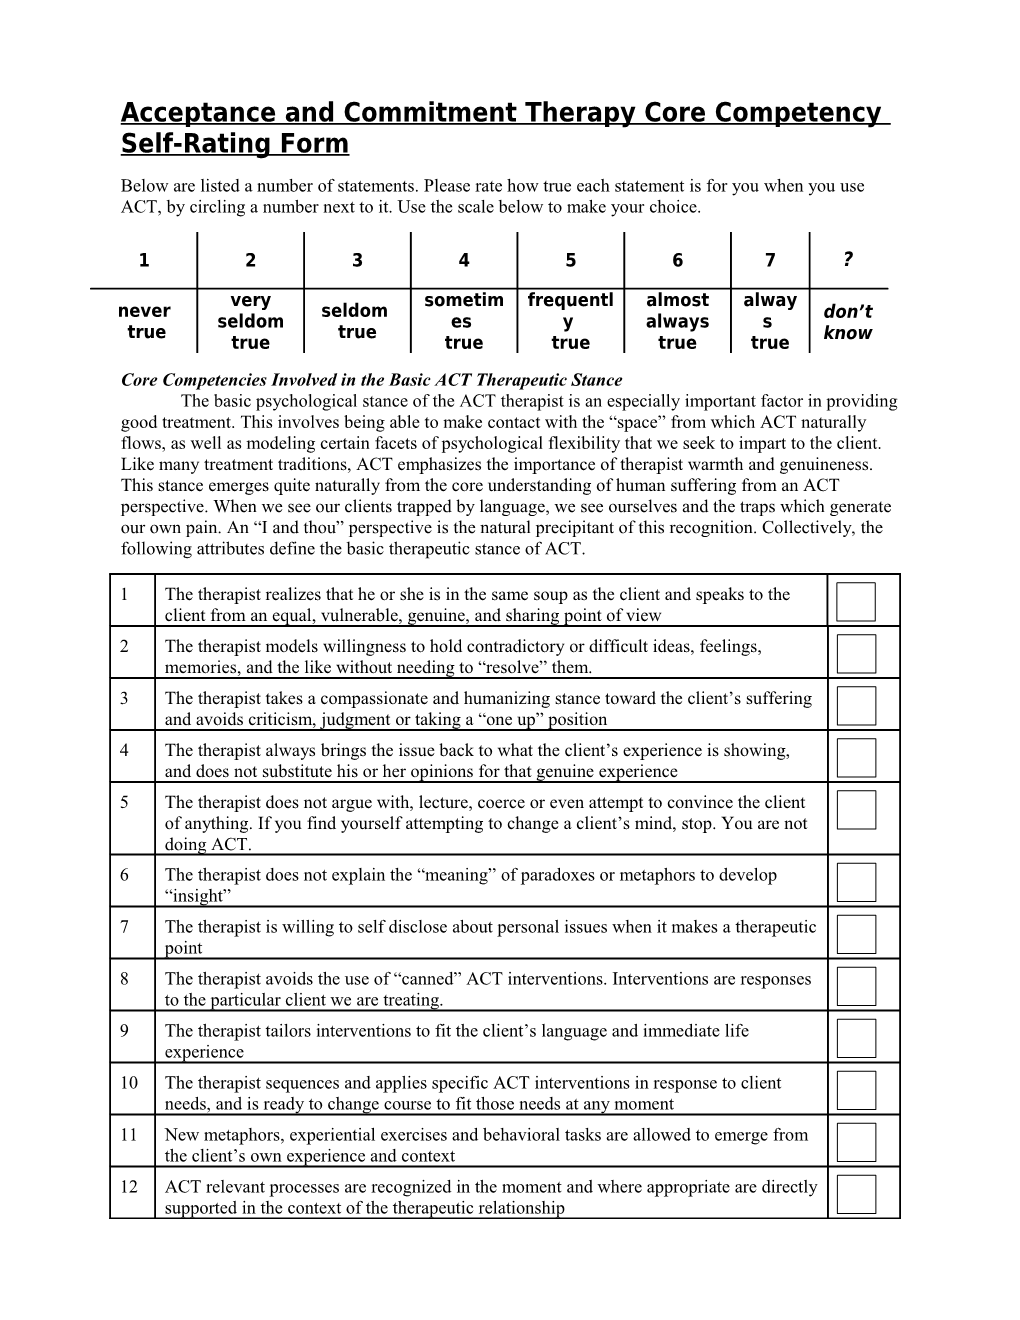 Self-Rating Core Competencies Forms